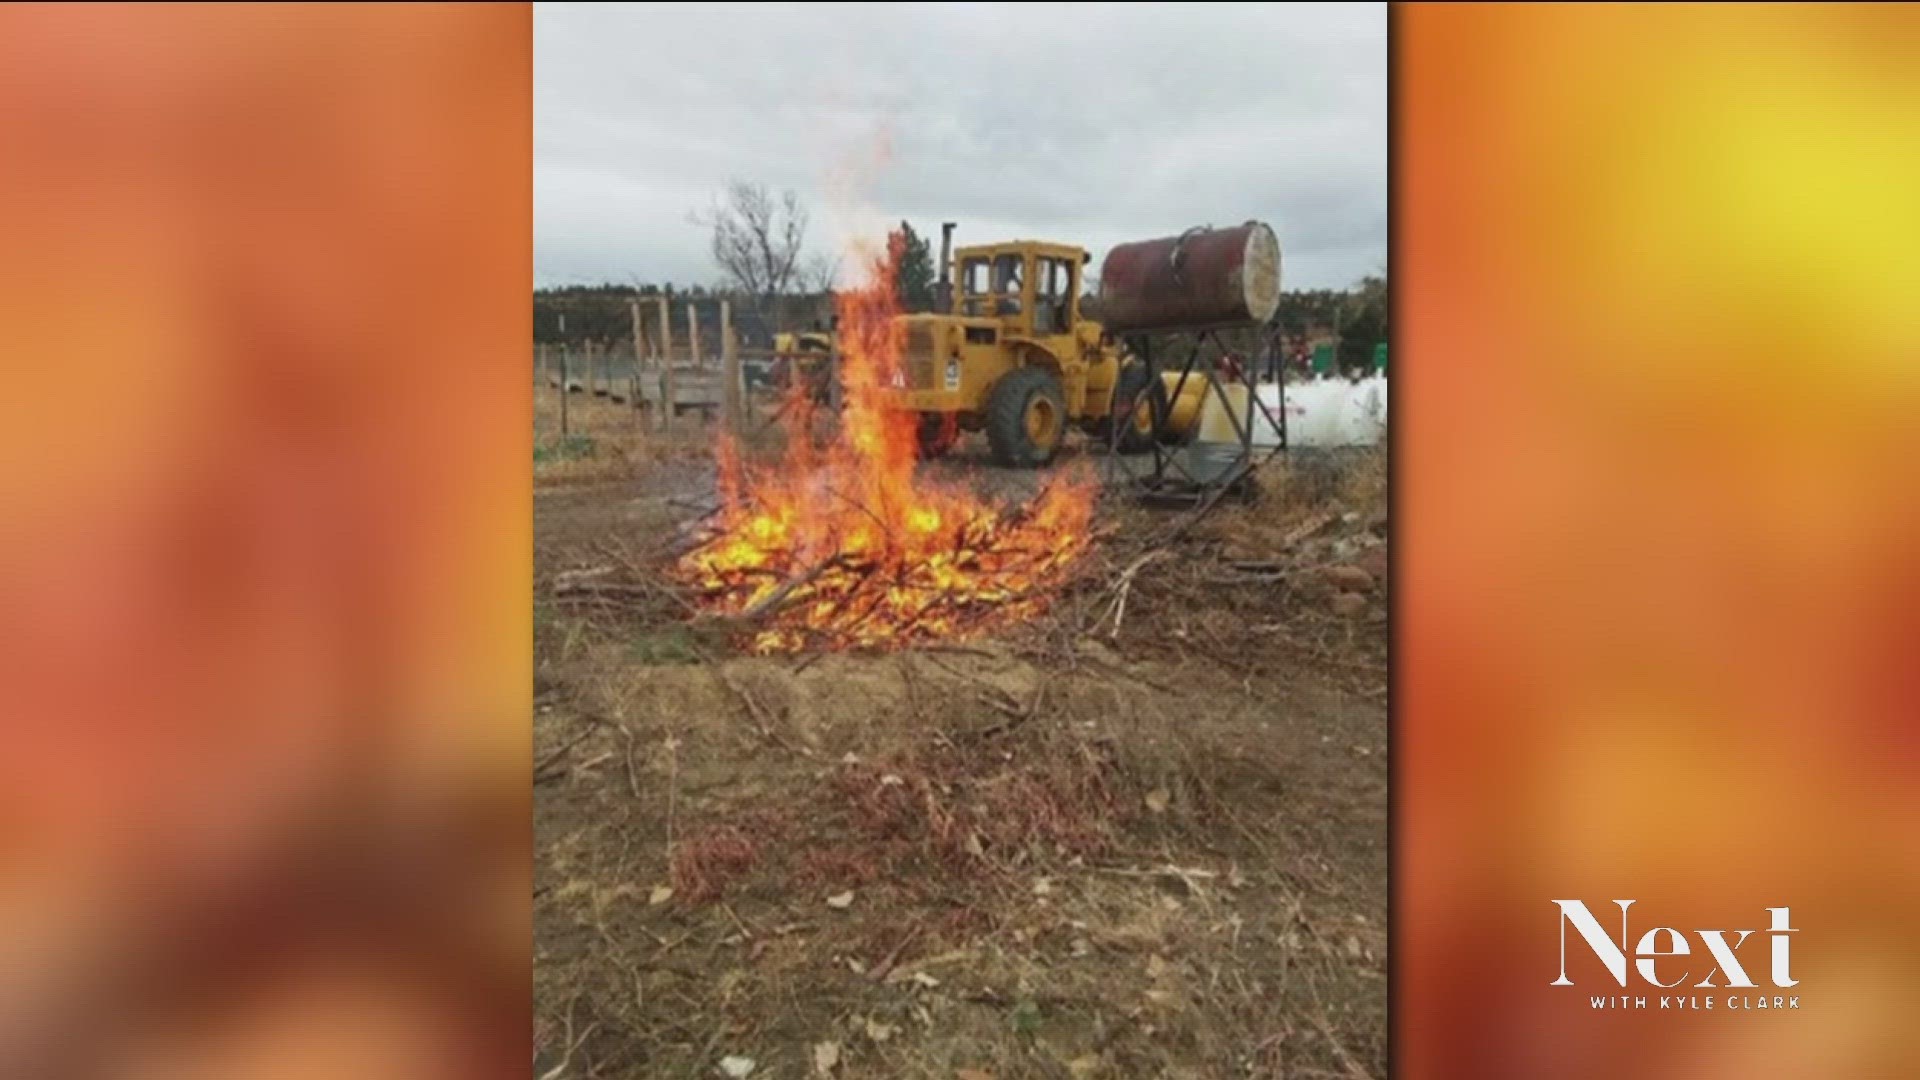 An investigation concluded that an intentionally set trash fire on property owned by a religious group known as Twelve Tribes was the initial point of origin.